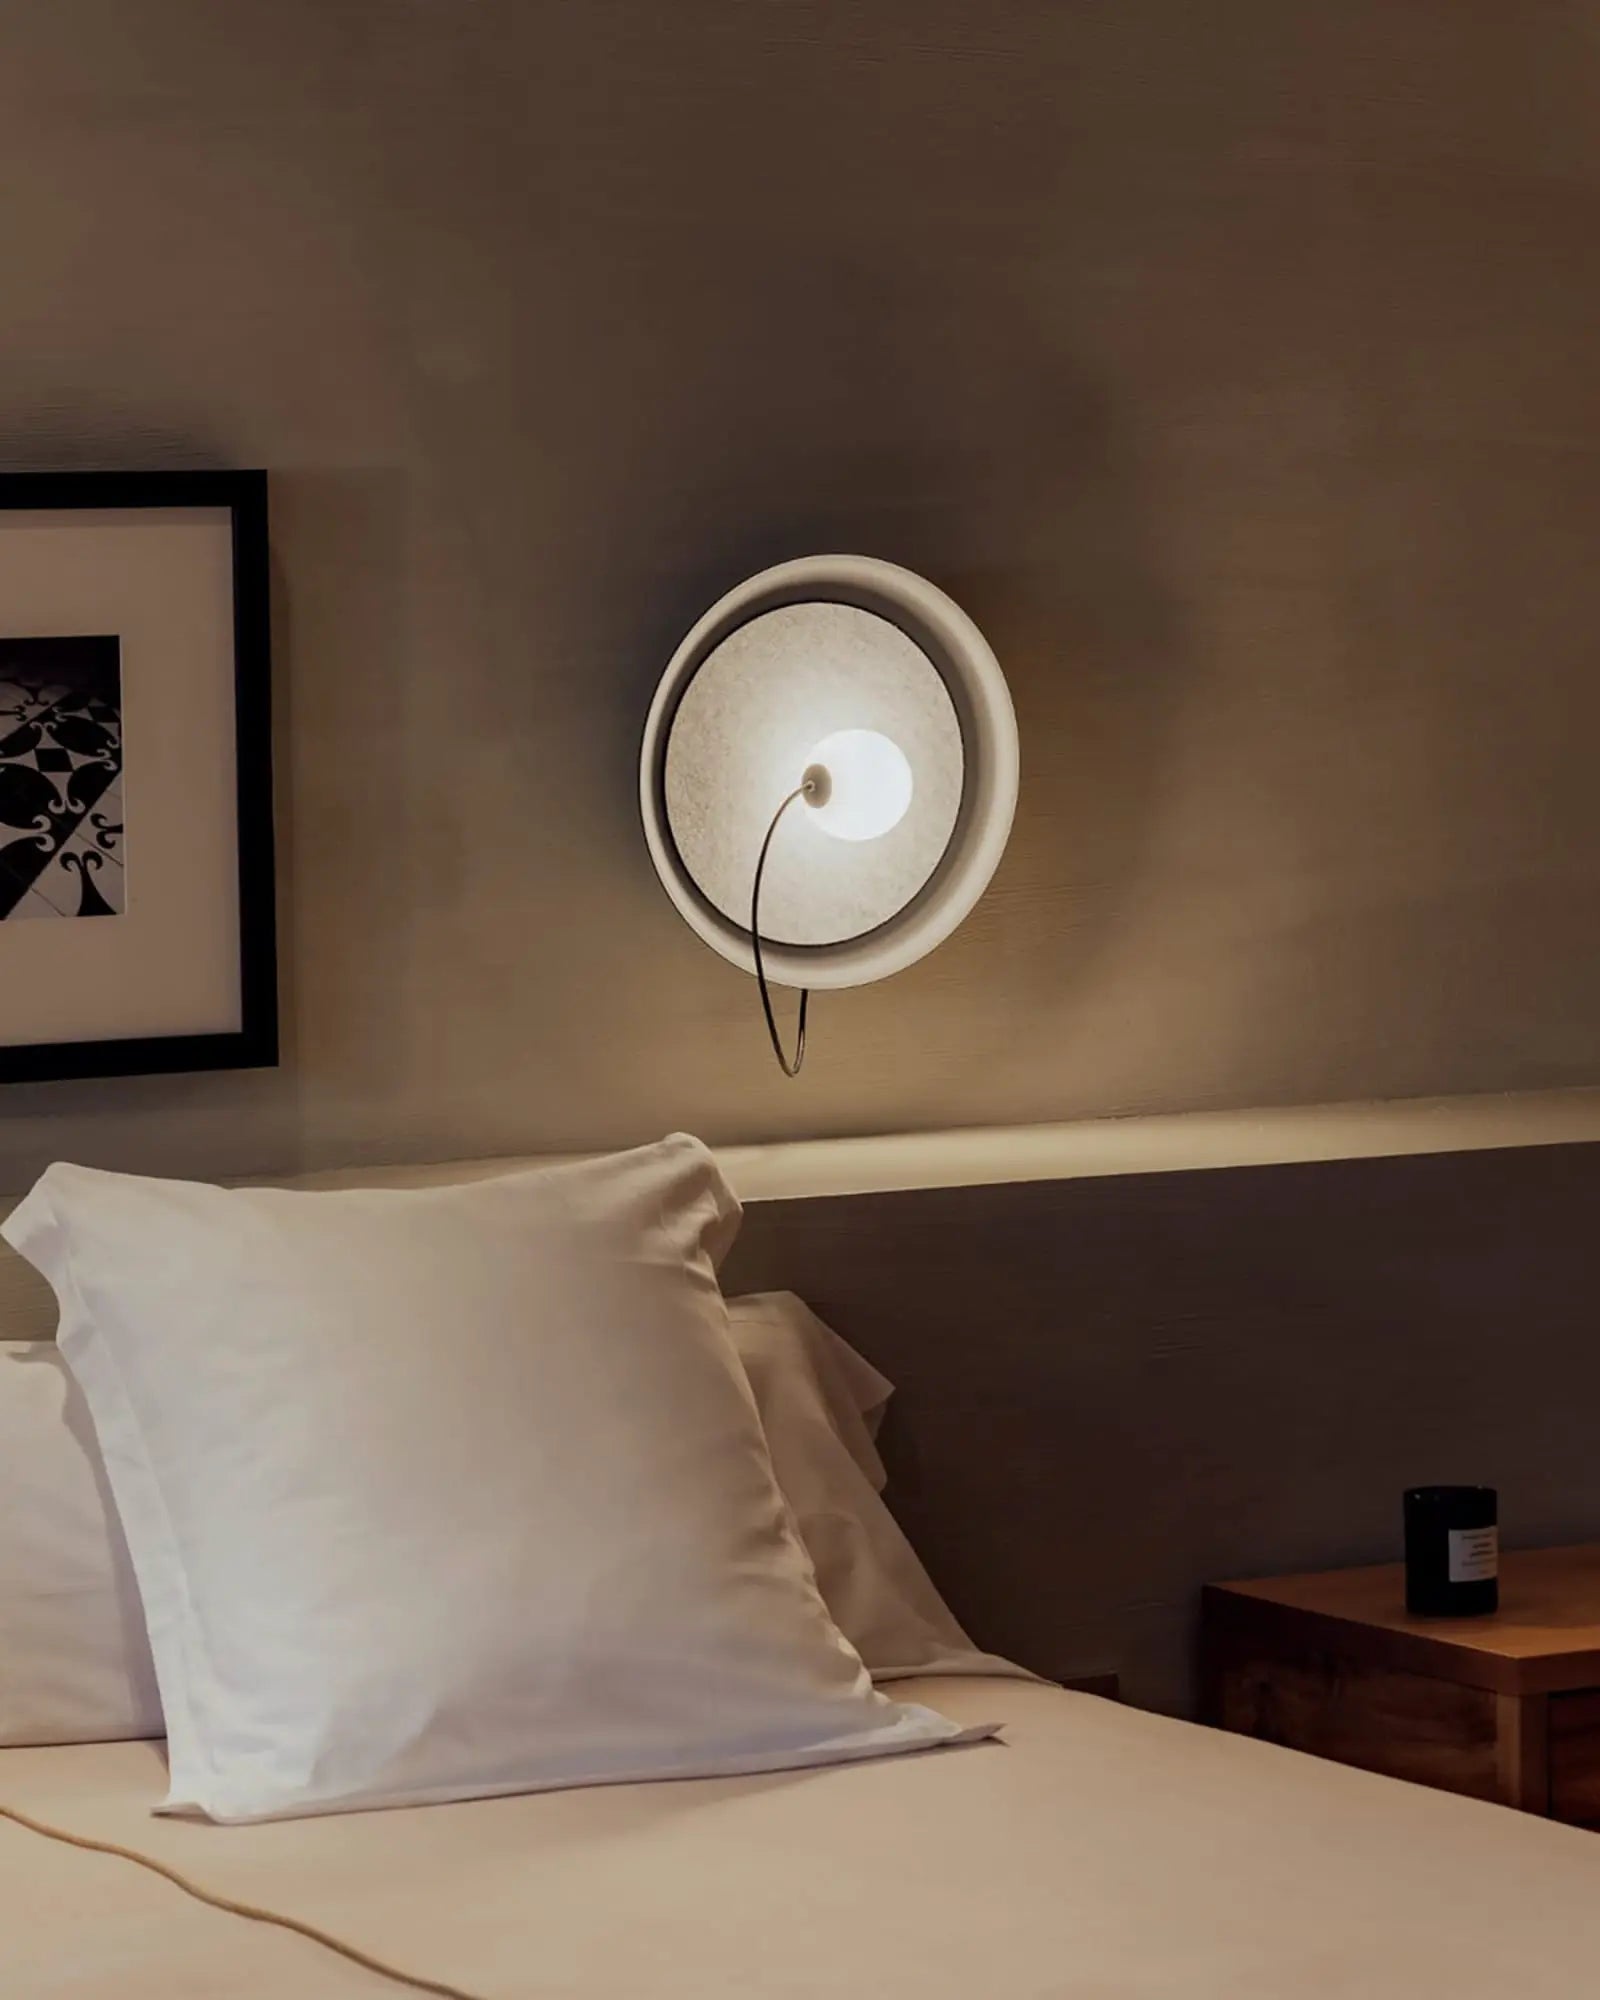 Wire wall light in a bedroom on the bedside